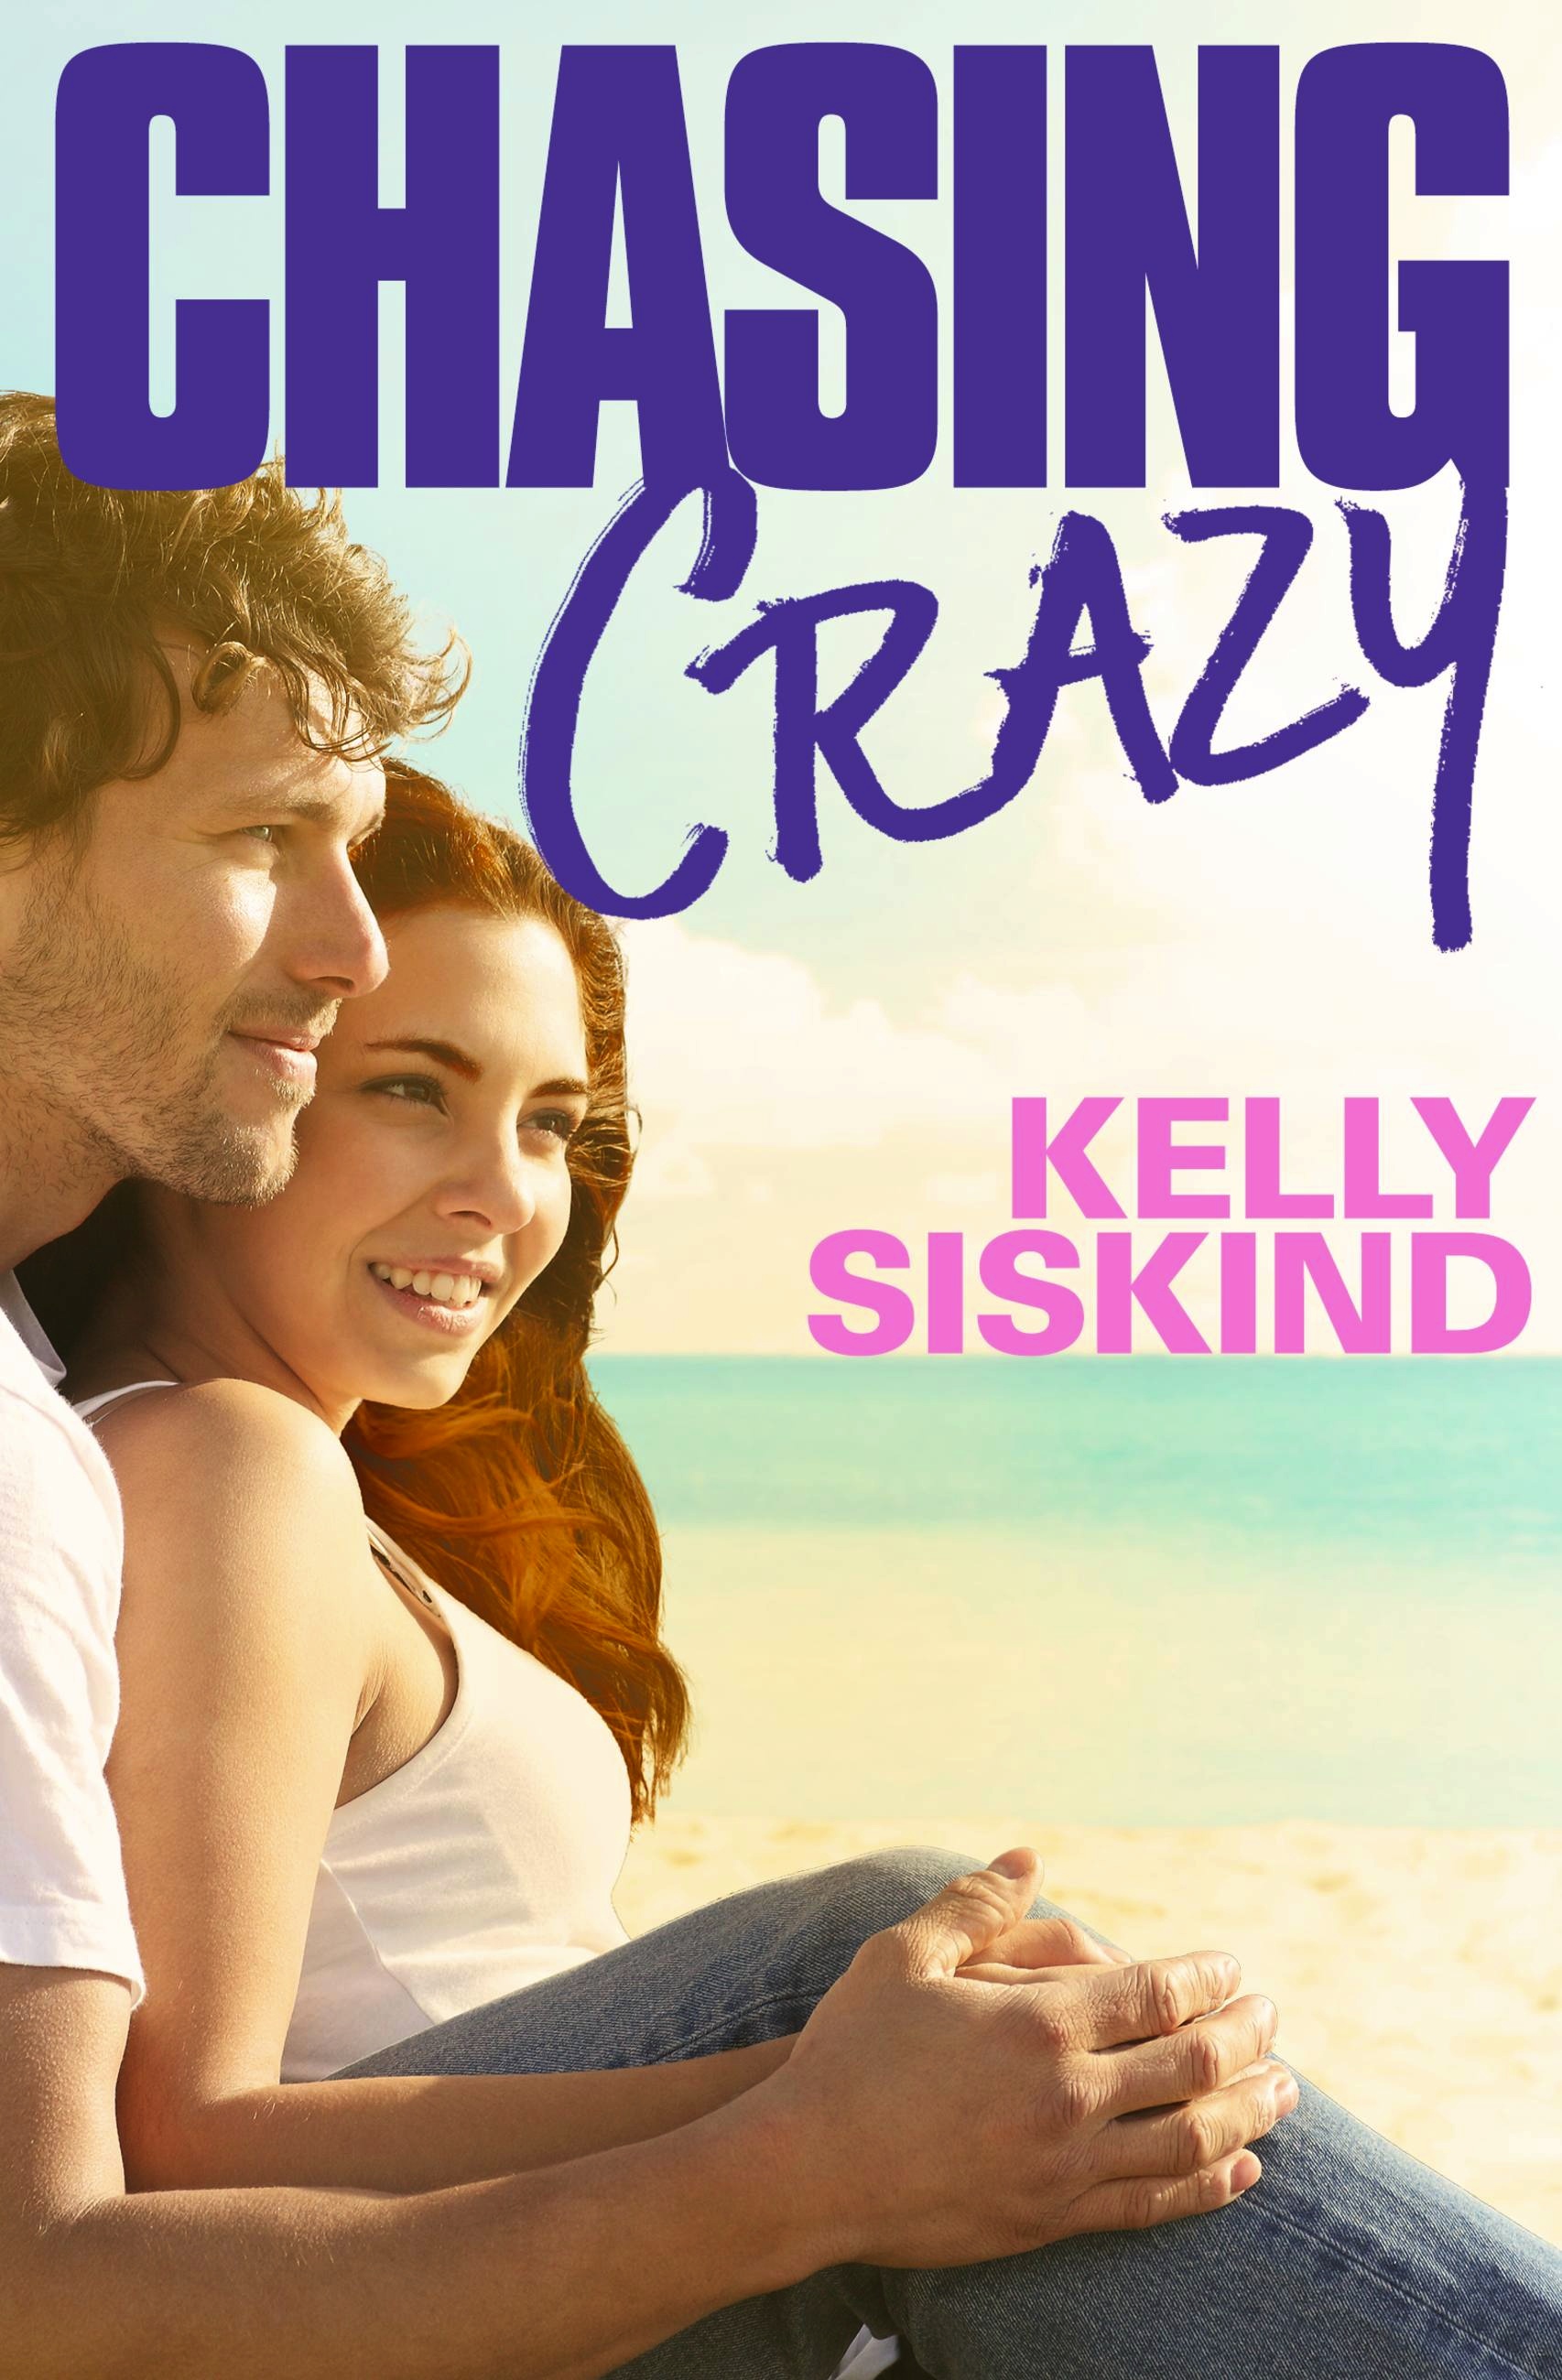 Pissing Nude Beach Couples - Chasing Crazy by Kelly Siskind | Hachette Book Group